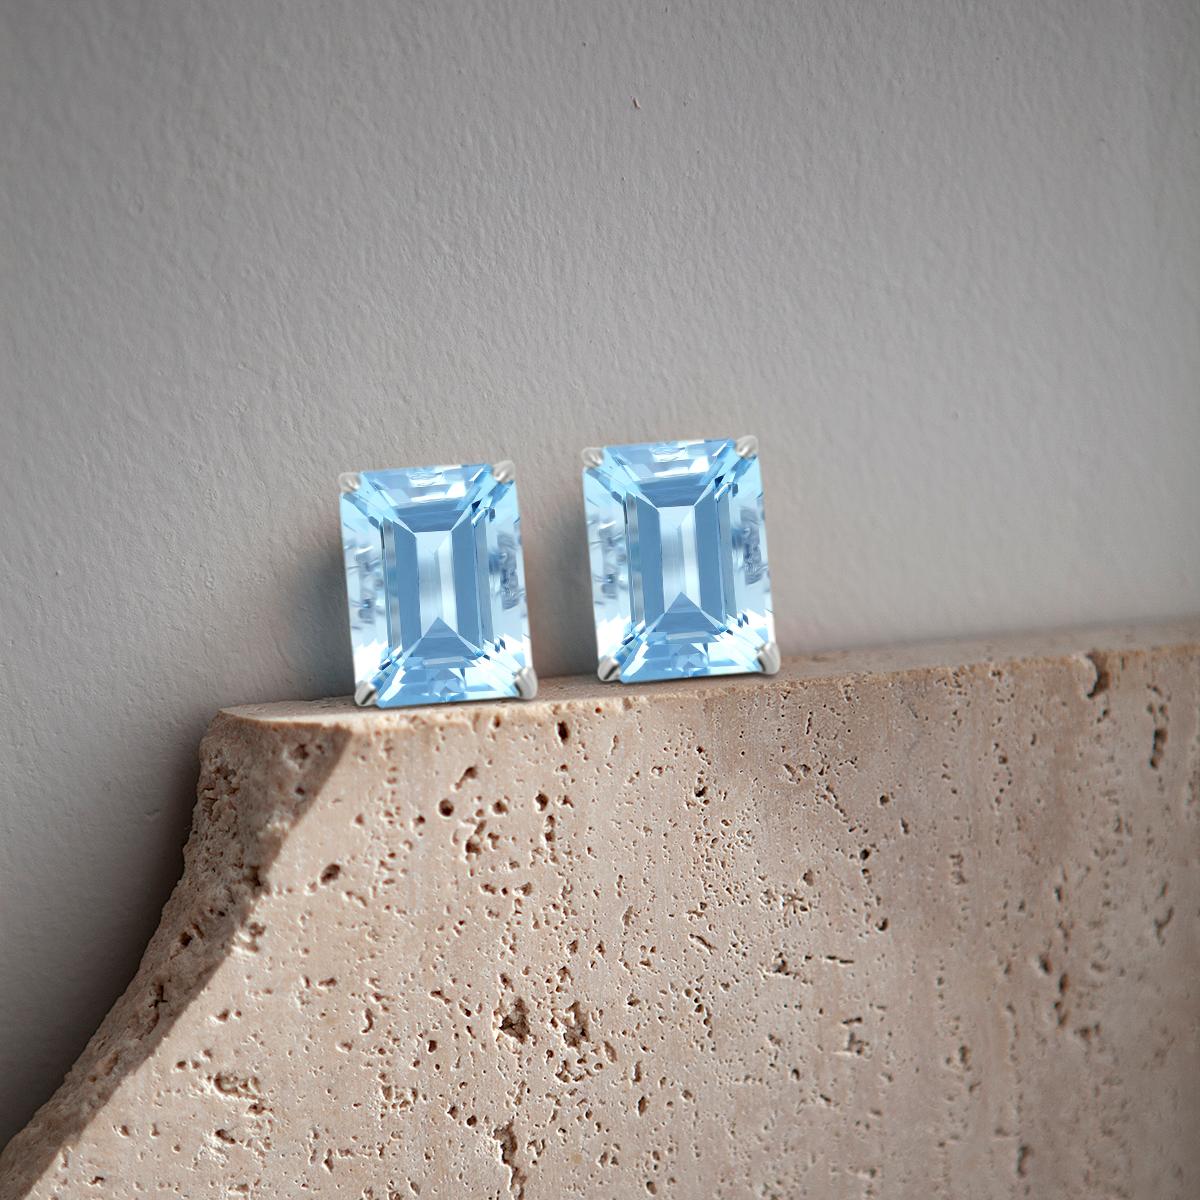 Octagon Cut 14k White Gold 2.37 Carats Aquamarine Earring, Style#E4668AQ 21192/4 For Sale